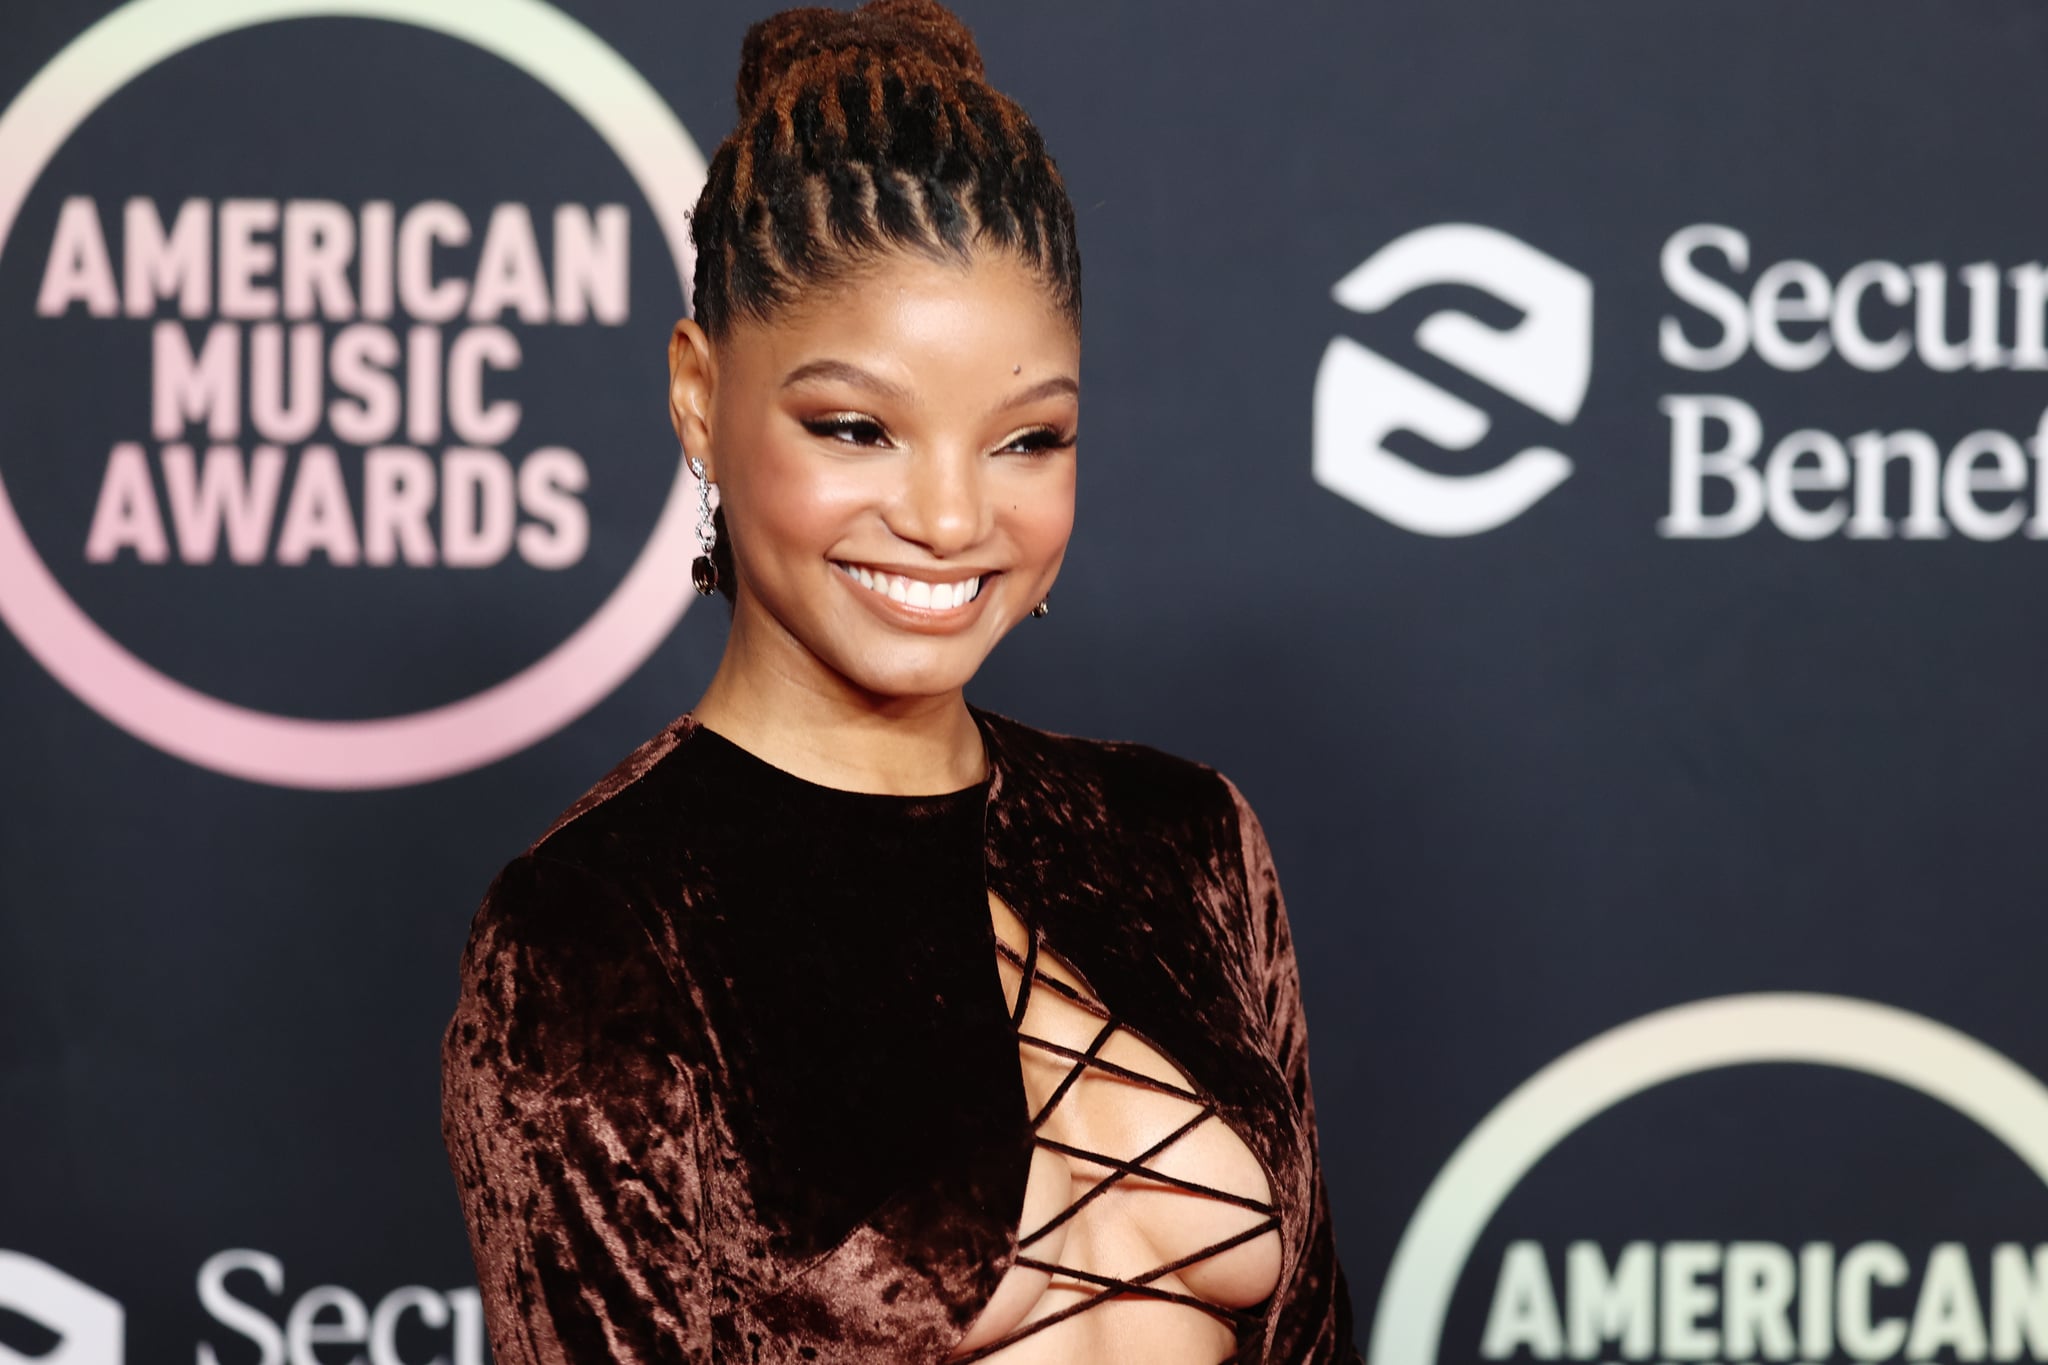 LOS ANGELES, CALIFORNIA - NOVEMBER 21: Halle Bailey attends the 2021 American Music Awards at Microsoft Theatre on November 21, 2021 in Los Angeles, California. (Photo by Matt Winkelmeyer/Getty Images for MRC )